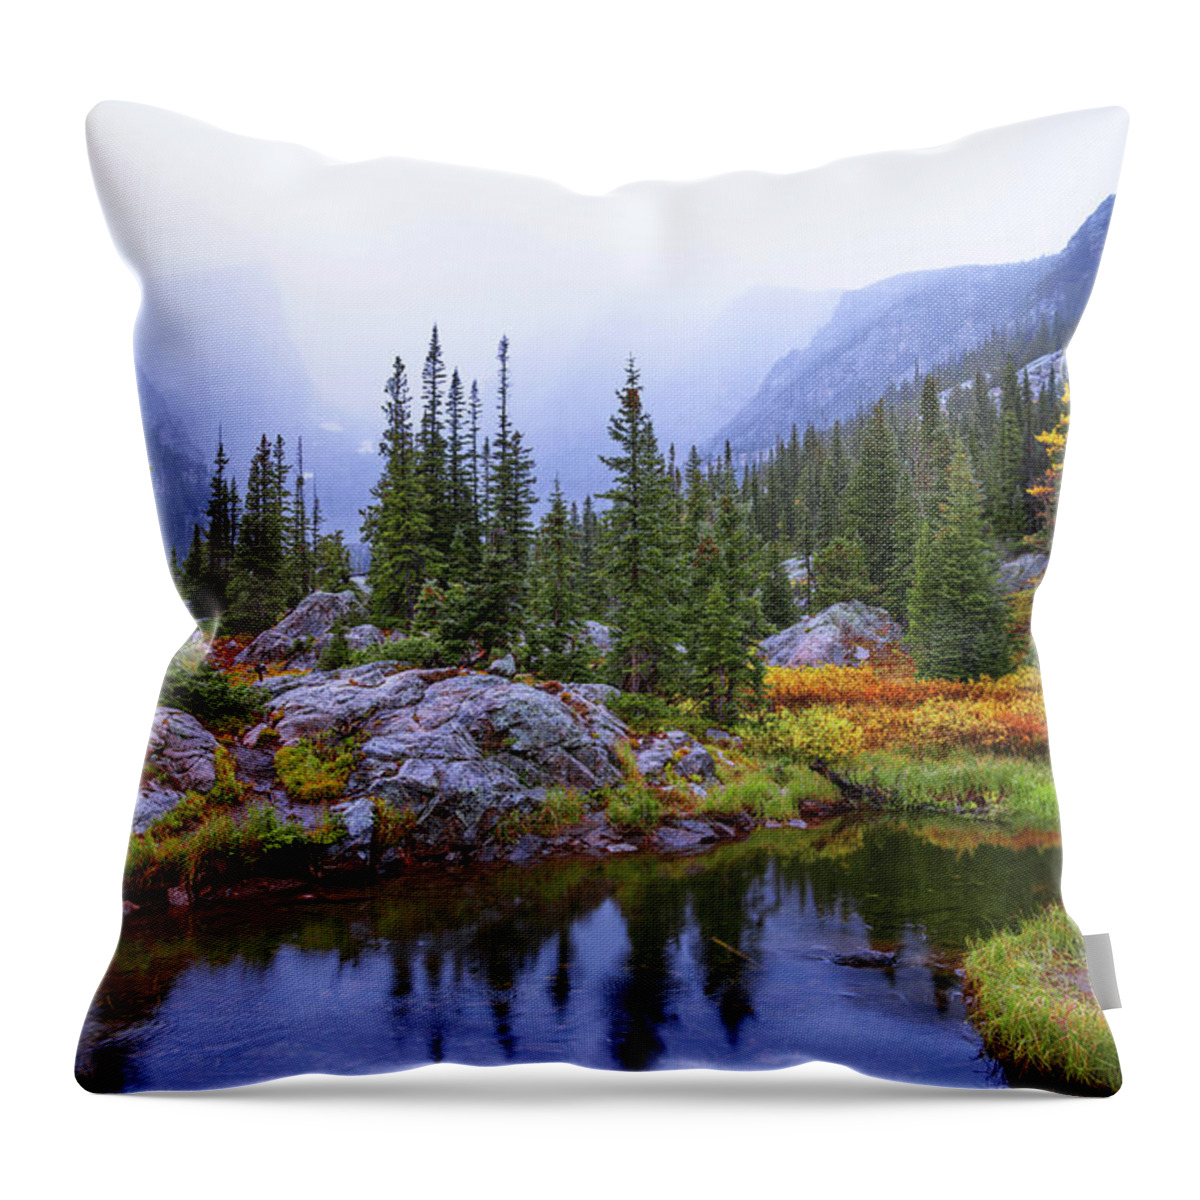 Saturated Forest Nature Forest Wilderness Wild Rocky Mountain National Park Rmnp Colorado American West West Rocky Rockies Mountain Mountains Tree Trees Pine Pines Pond Lake Light Reflection Storm Rain Fall Autumn Season Landscape Waterscape Forestscape Overcast Chad Dutson Saturation Wet Throw Pillow featuring the photograph Saturated Forest by Chad Dutson